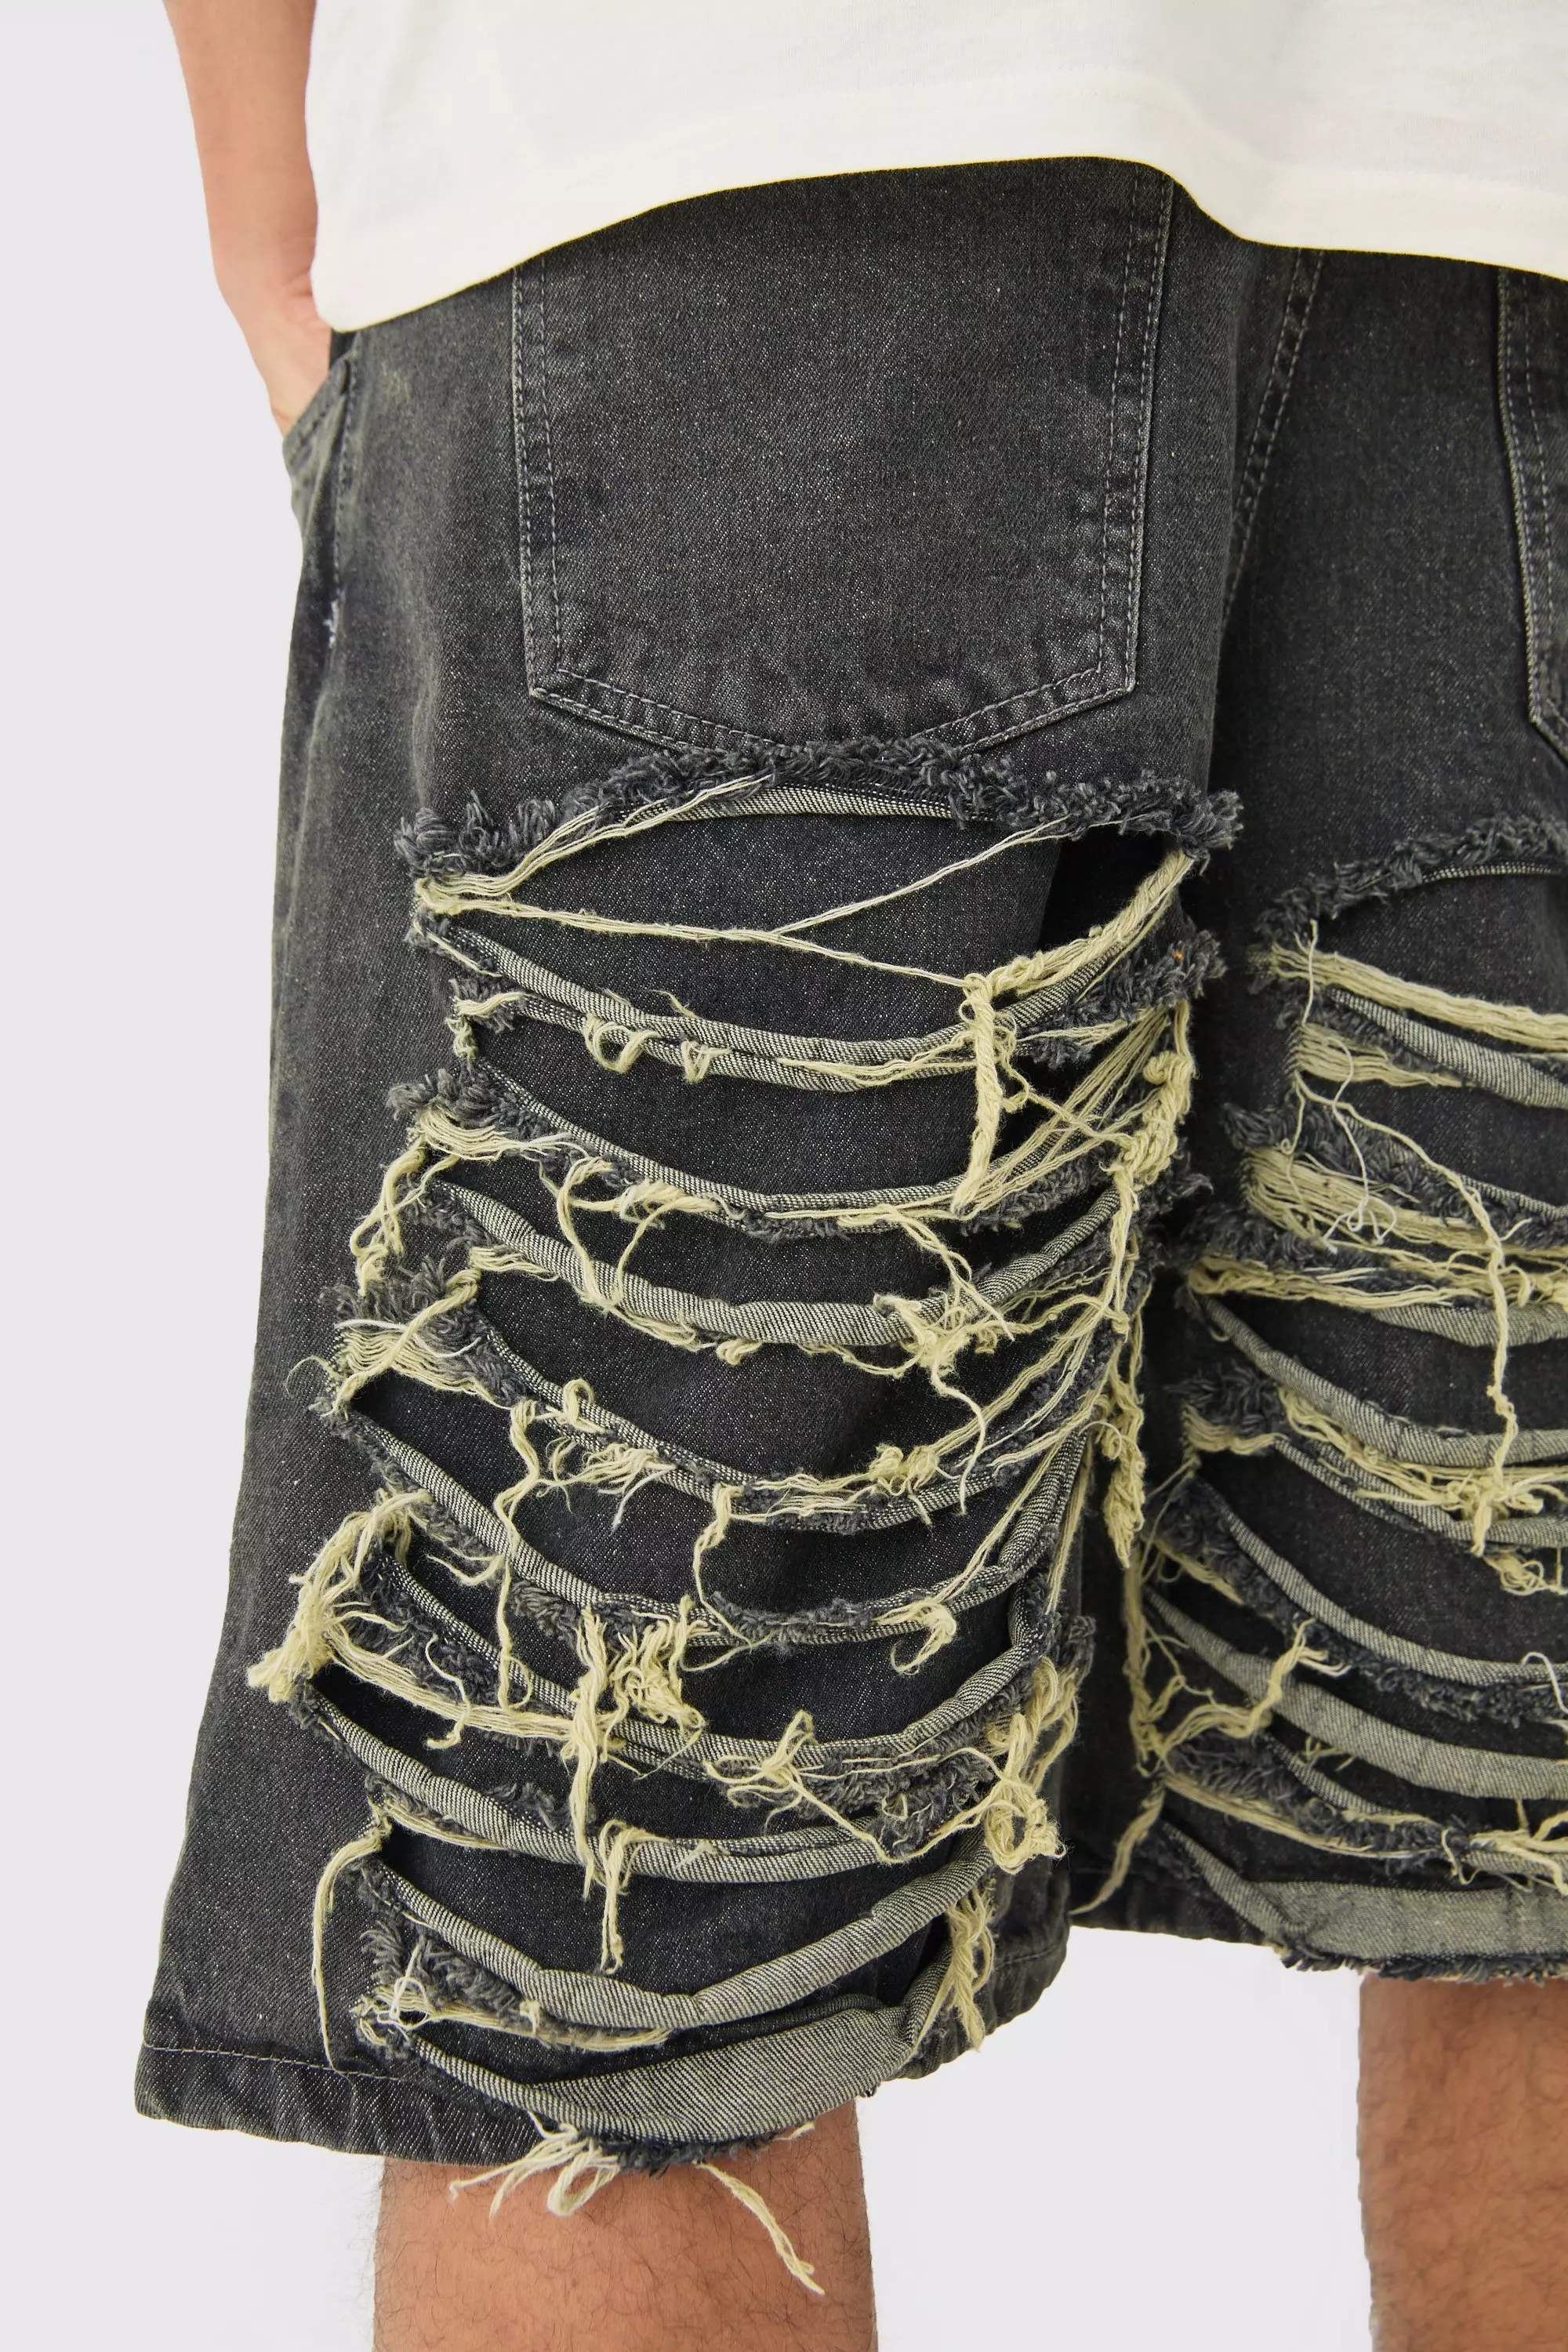 Relaxed Rigid Extreme Ripped Denim Jort In Antique Grey Grey